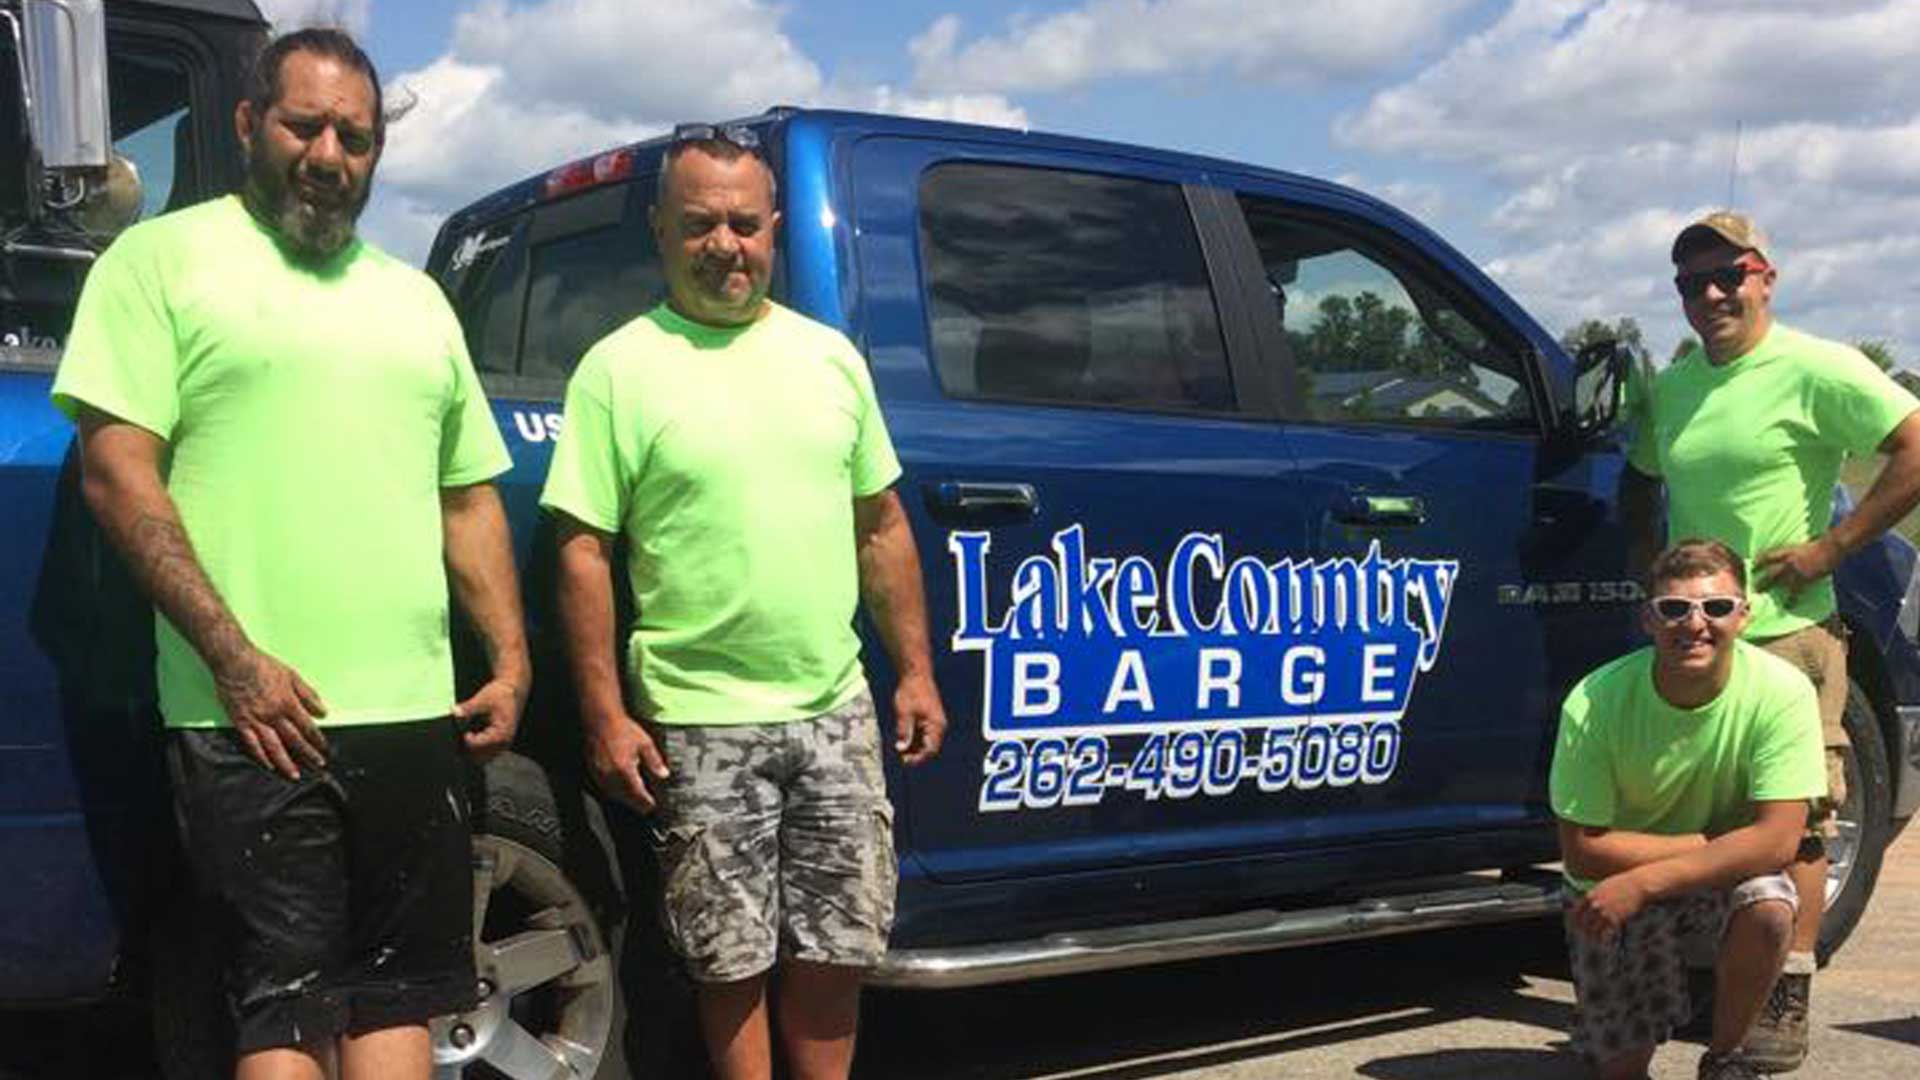 Lake Country Barge Truck